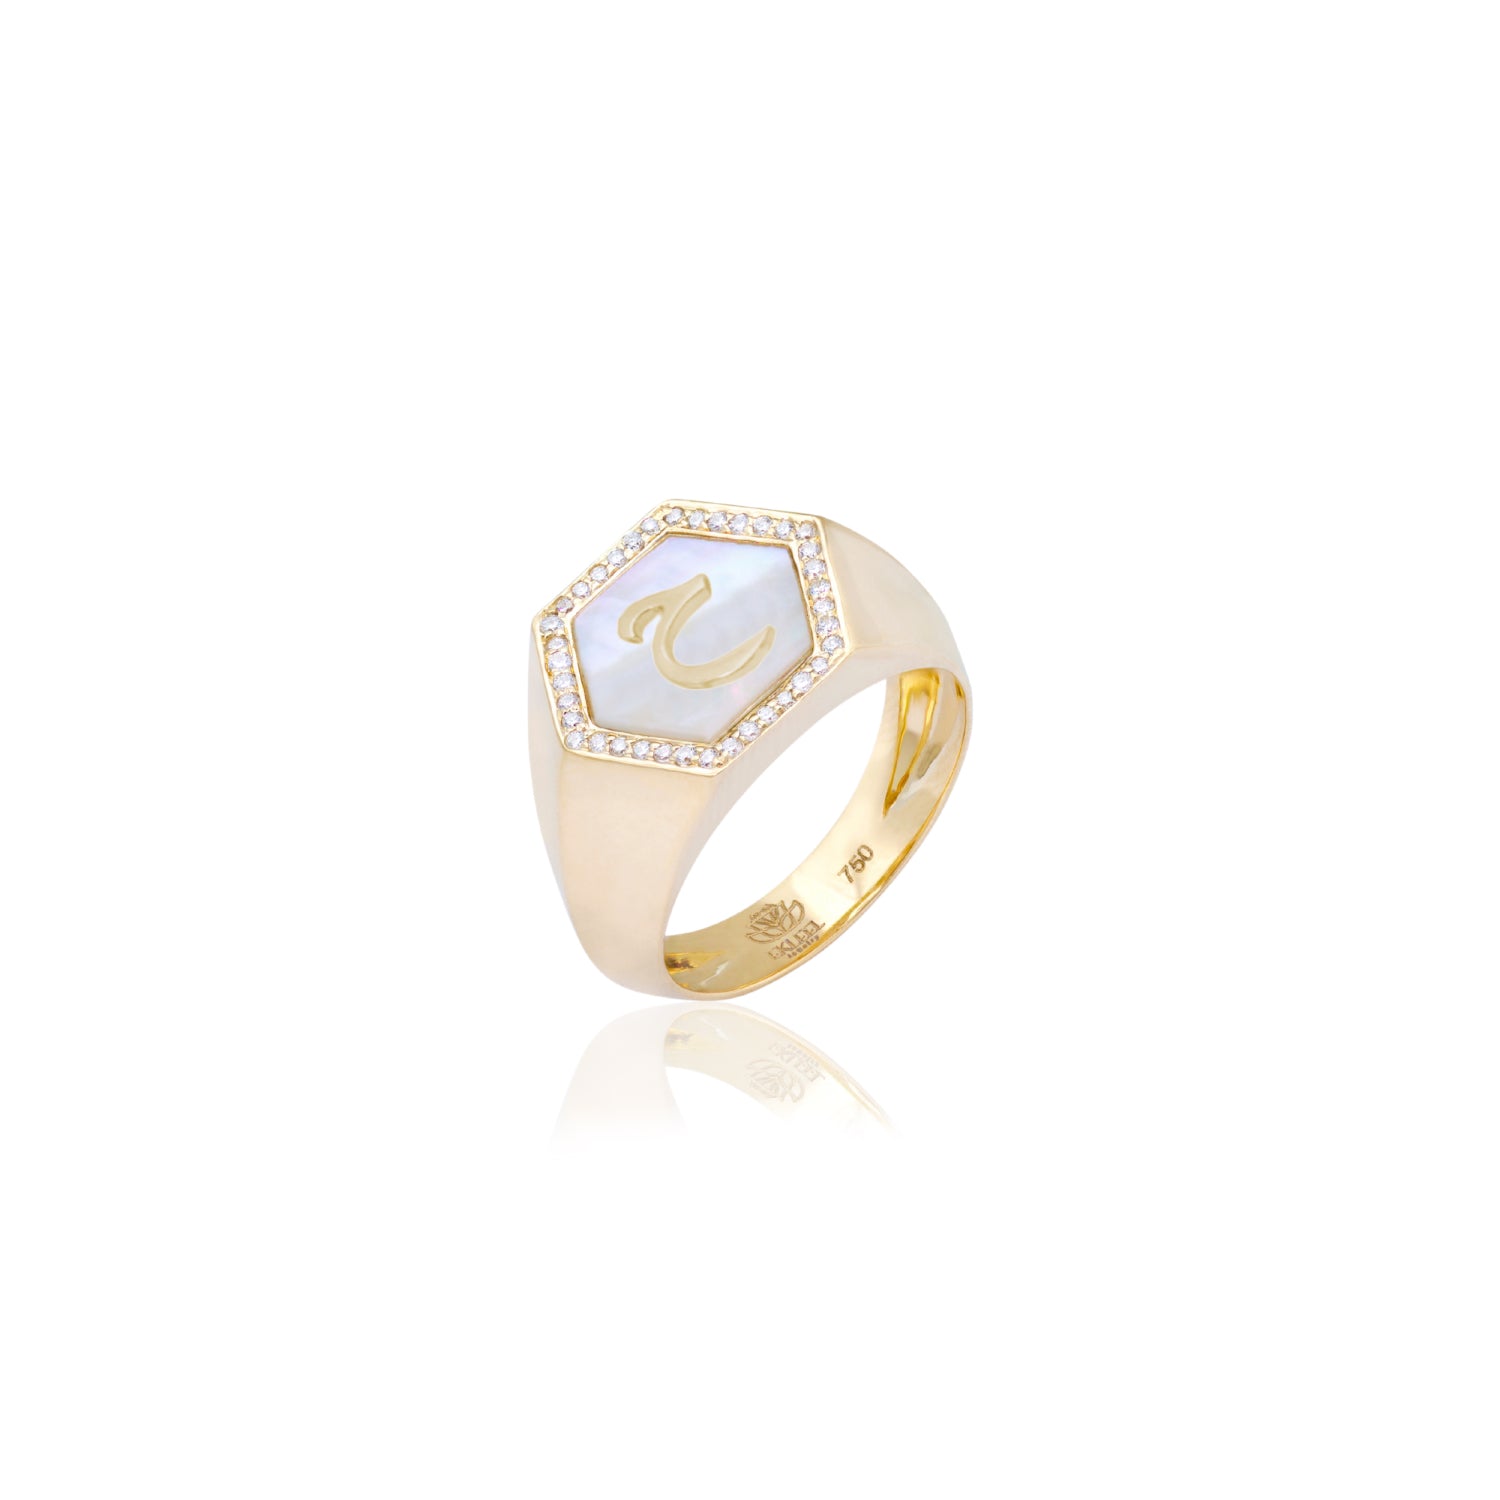 Qamoos 2.0 Letter ح White Mother of Pearl and Diamond Signet Ring in Yellow Gold